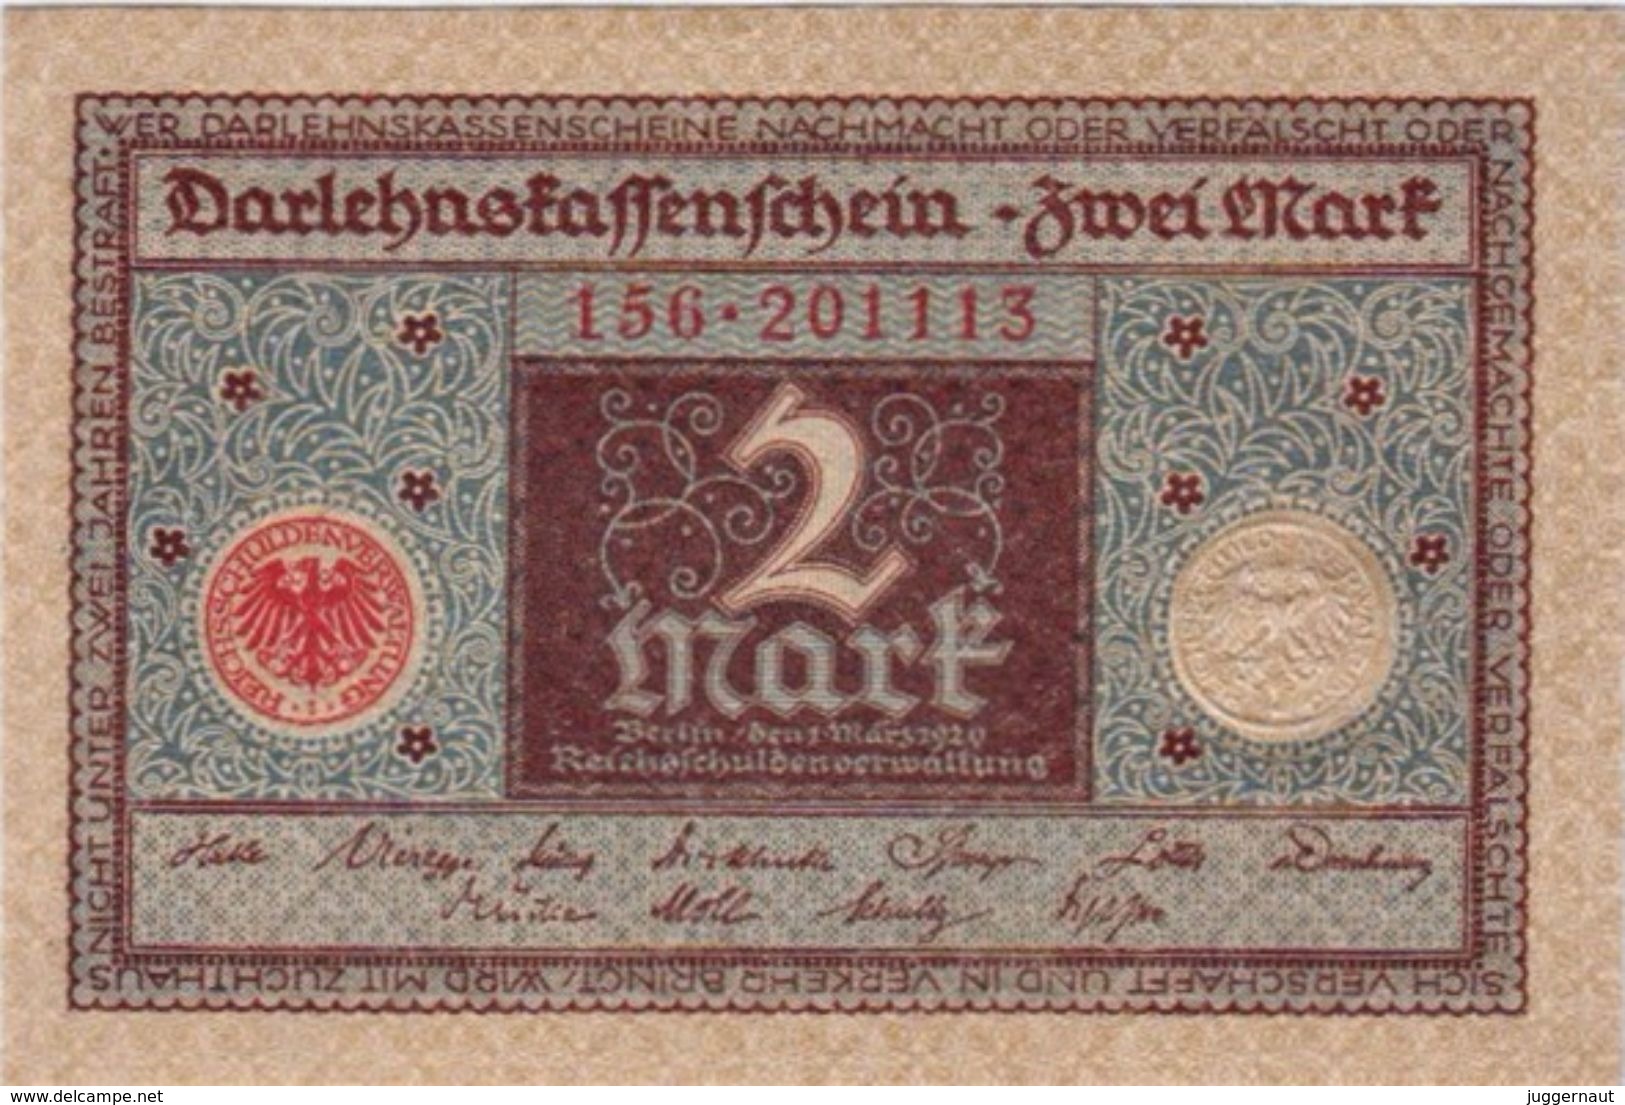 GERMANY 2 MARK REICHSBANKNOTE 1920 AD PICK NO.59 UNCIRCULATED UNC - 2 Mark